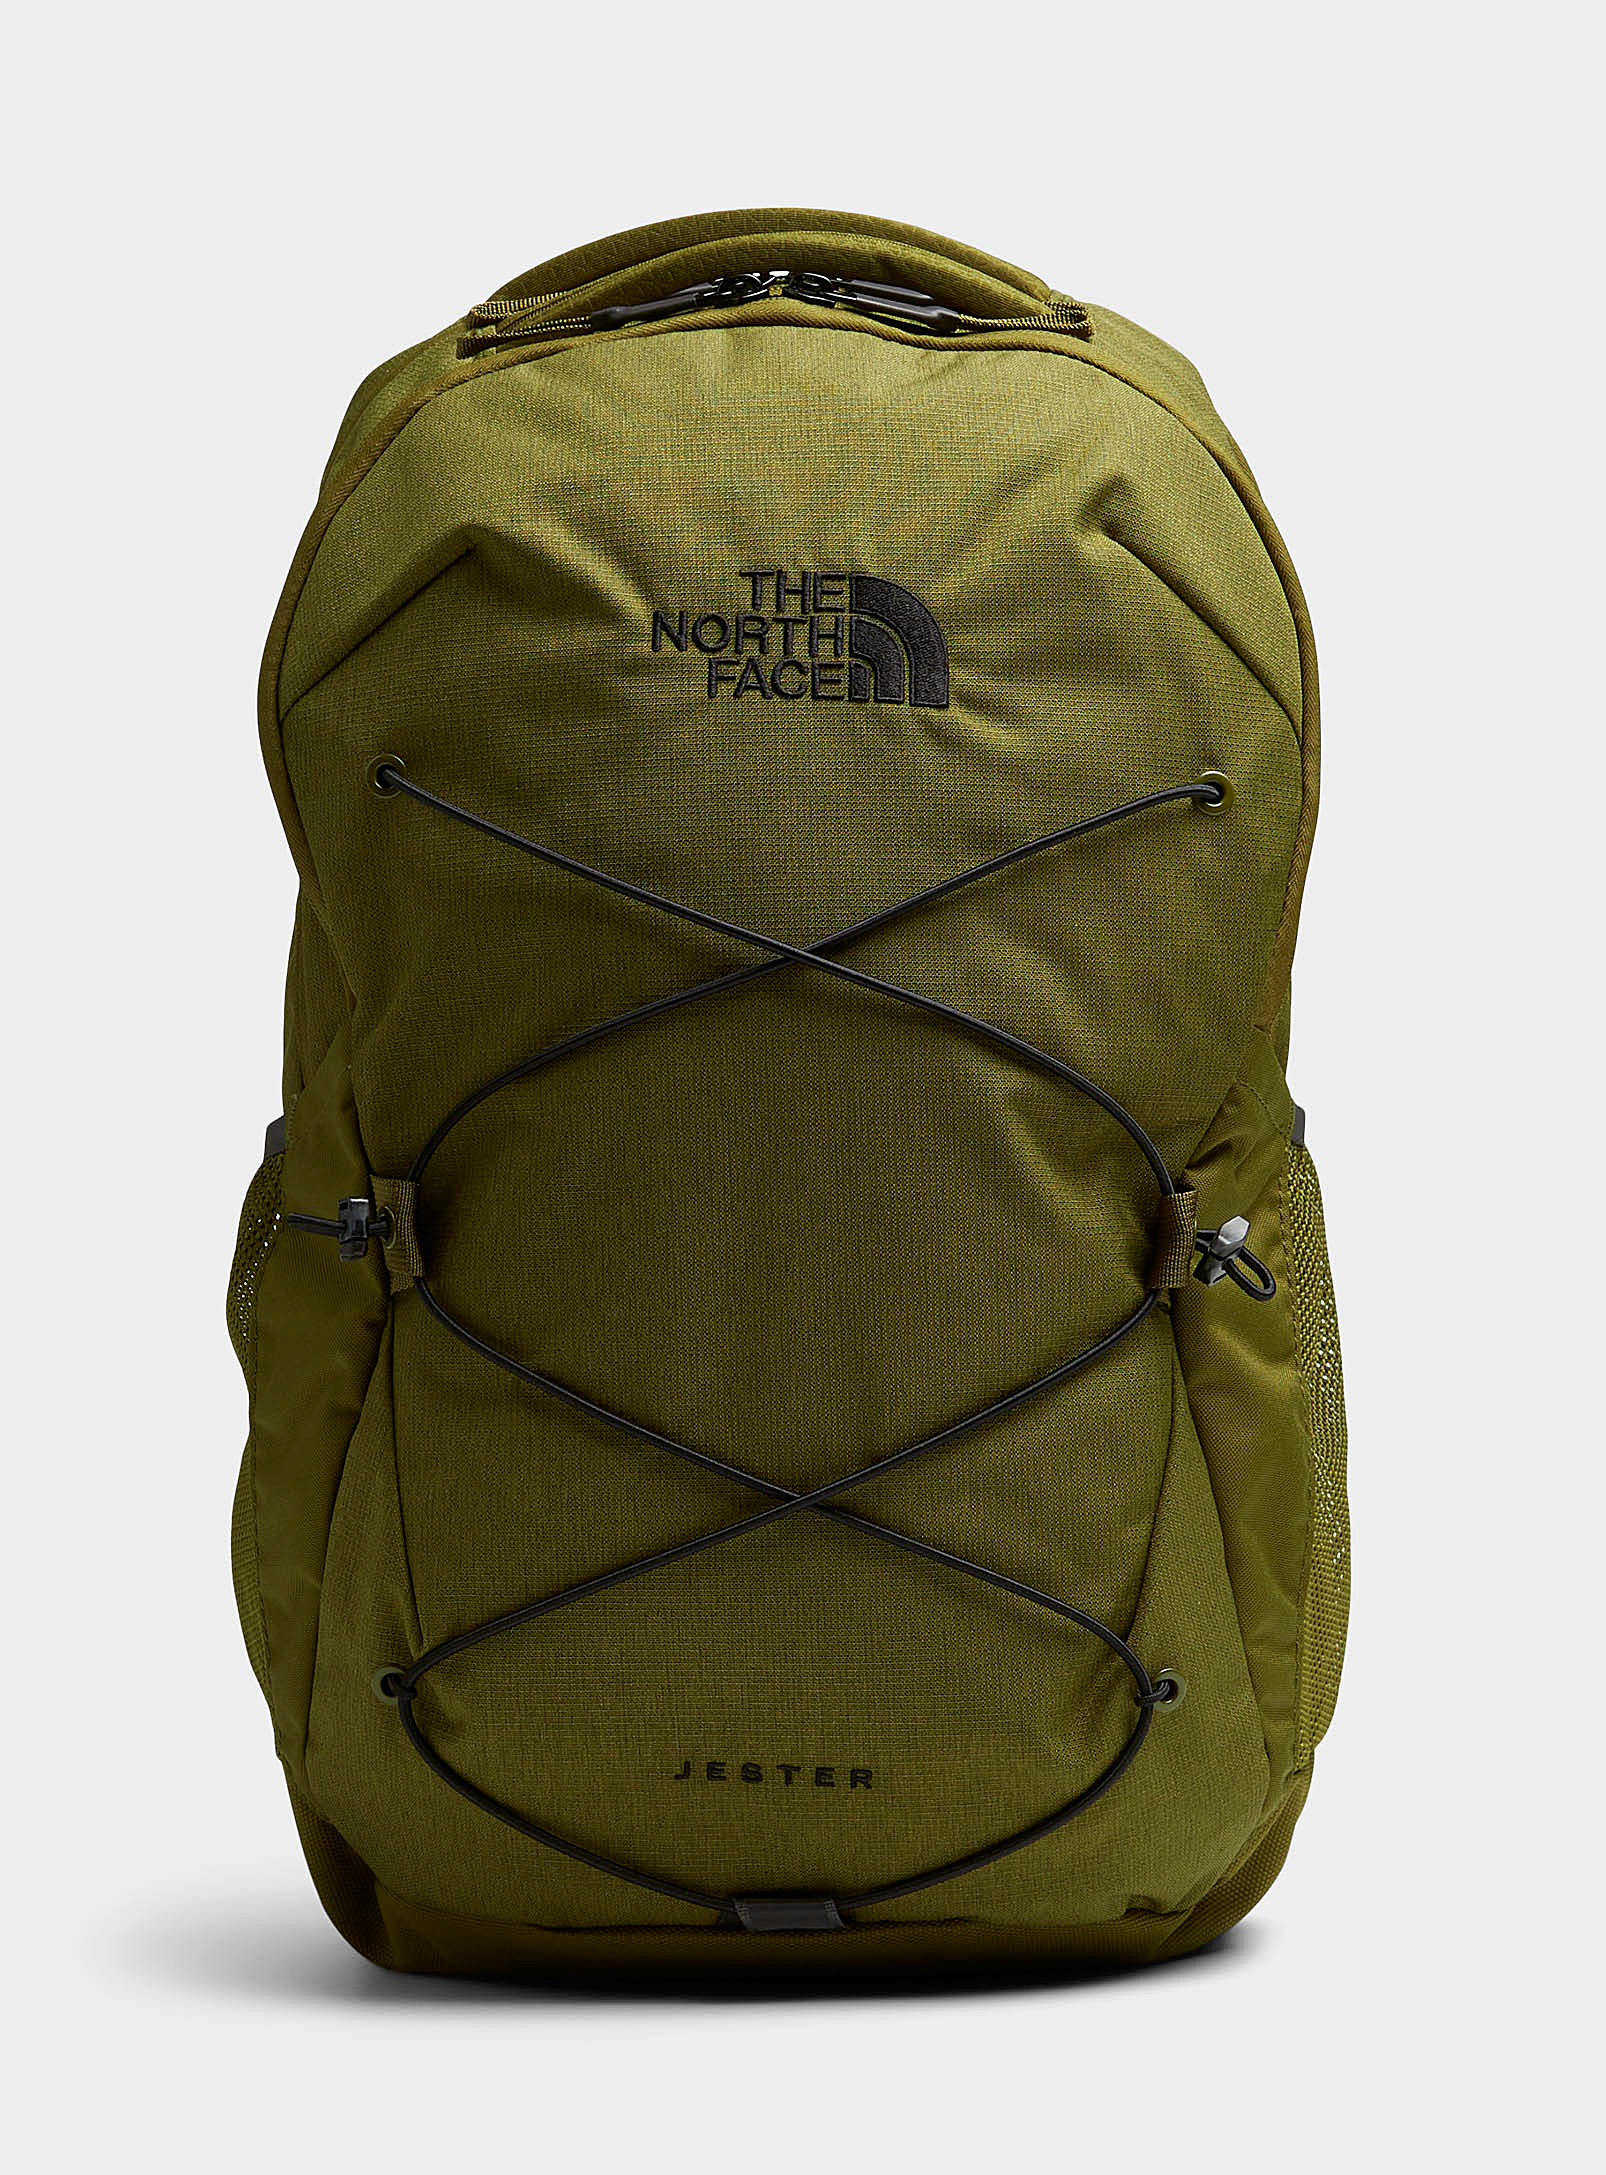 The North Face Jester Backpack In Green